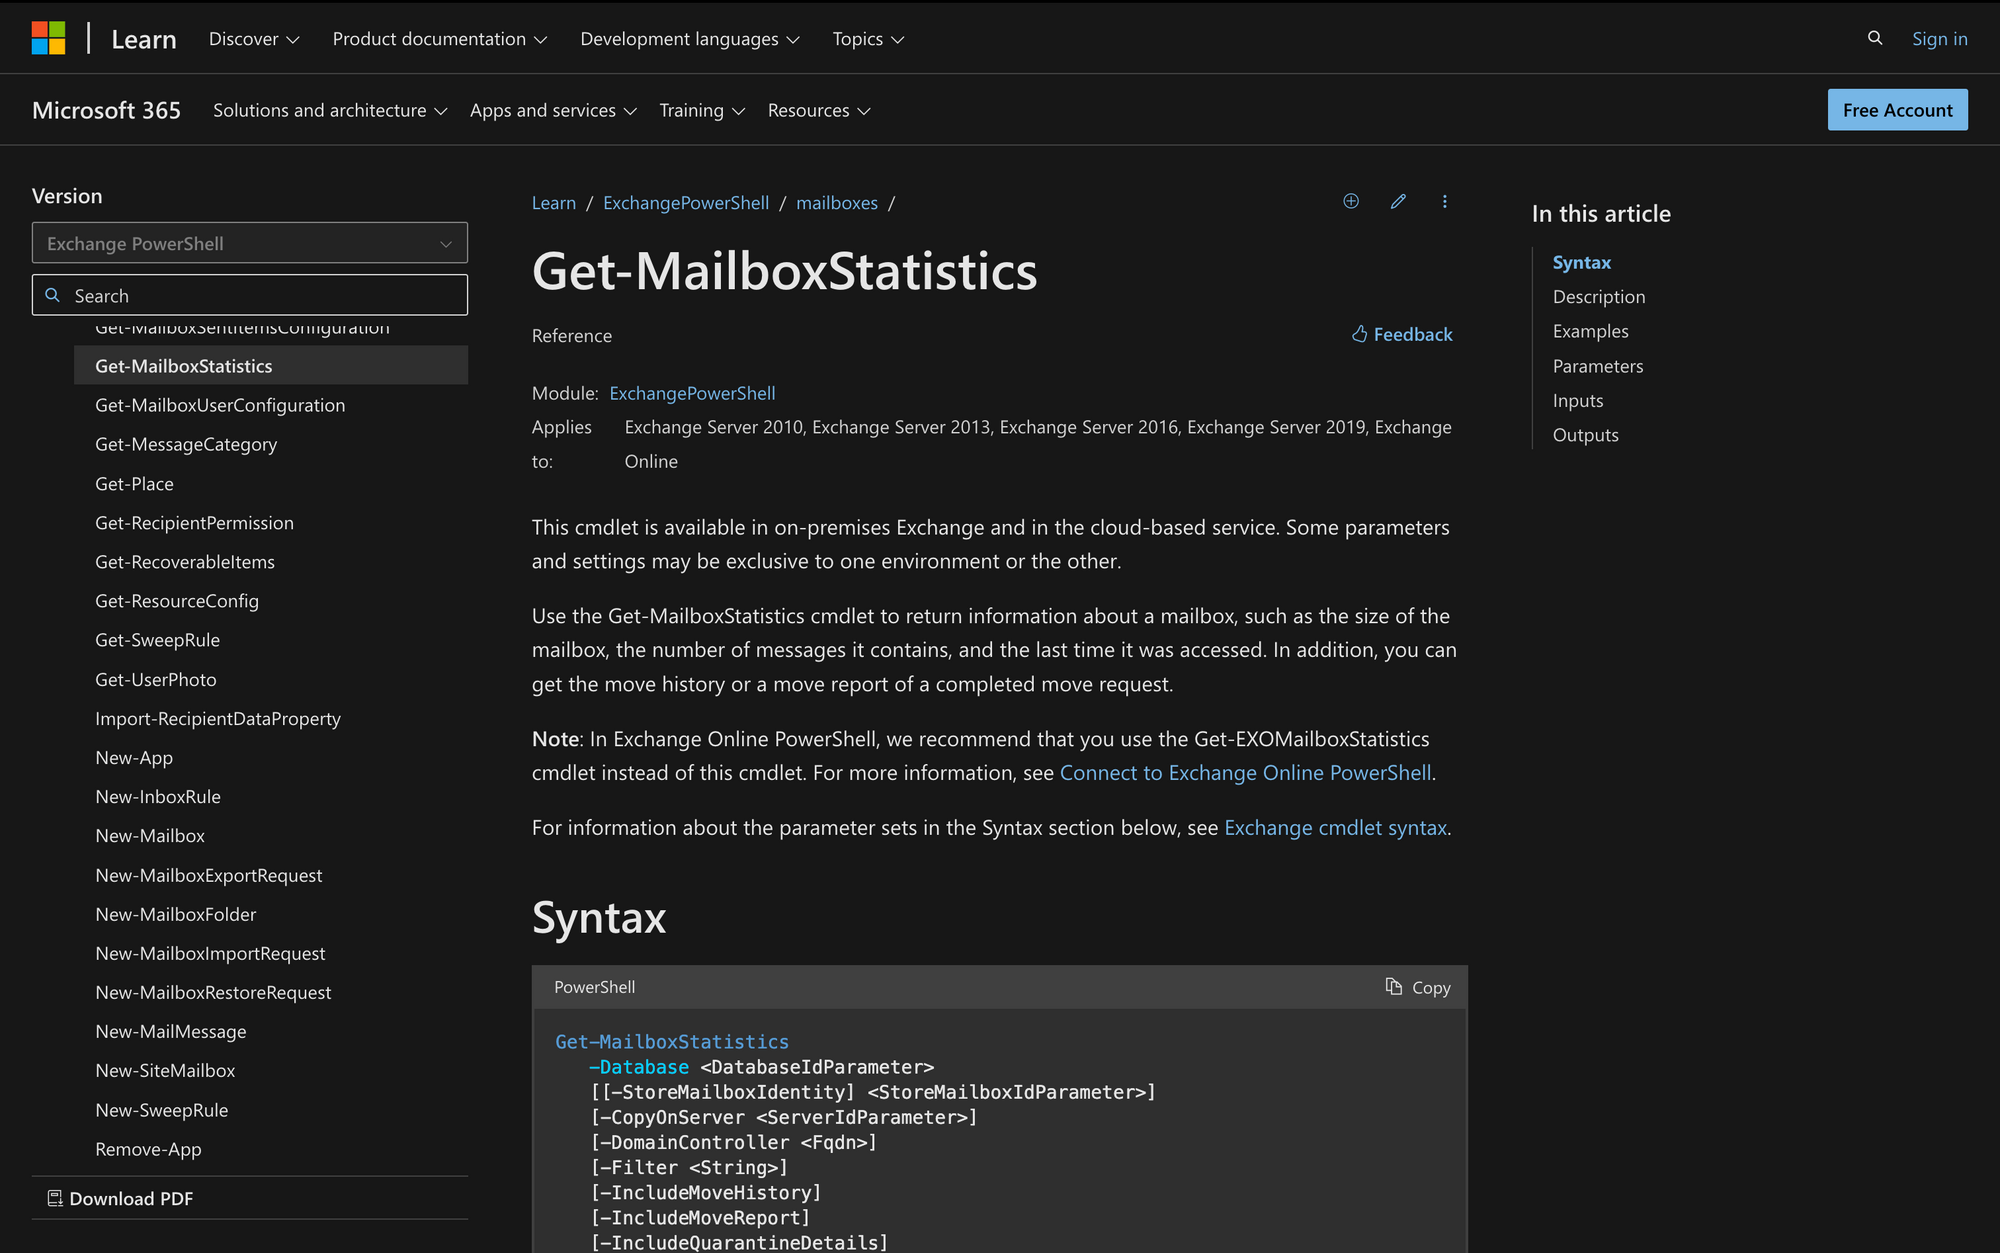 How to use Get-MailboxStatistics in Powershell